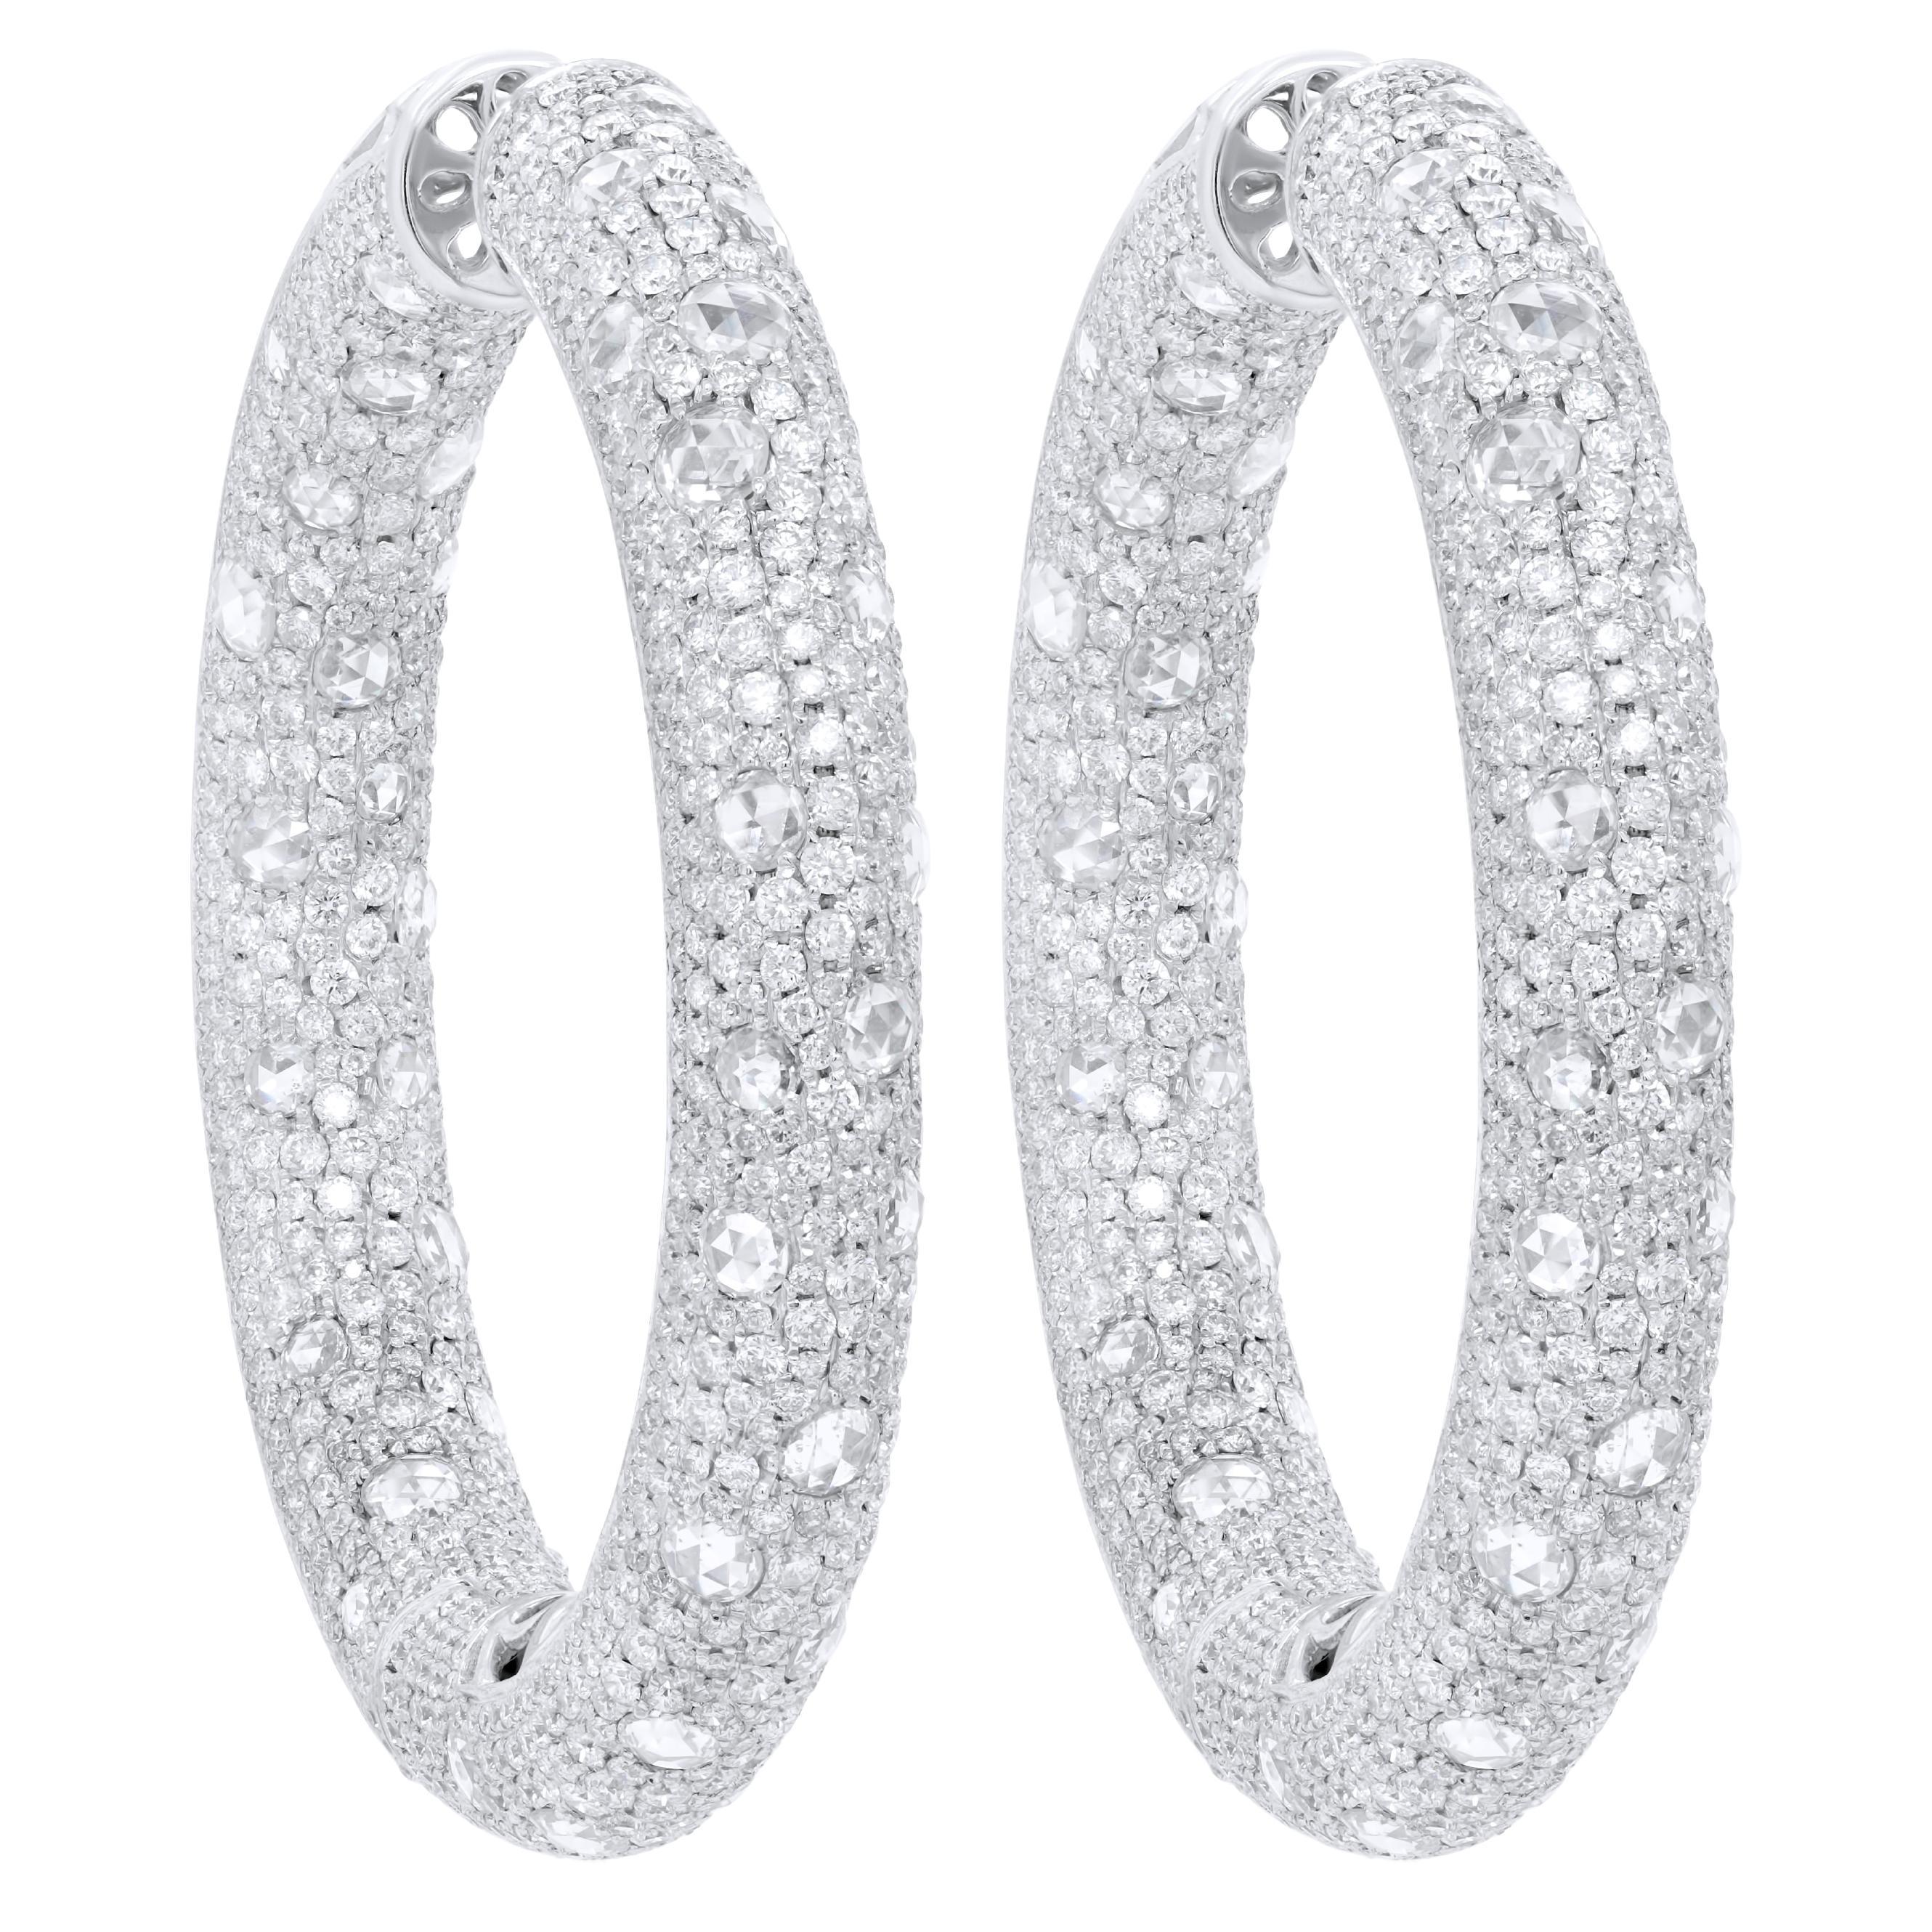 Diana M. 18 kt white gold, 2.25" inside-out hoop earrings adorned with 27.52cts  For Sale